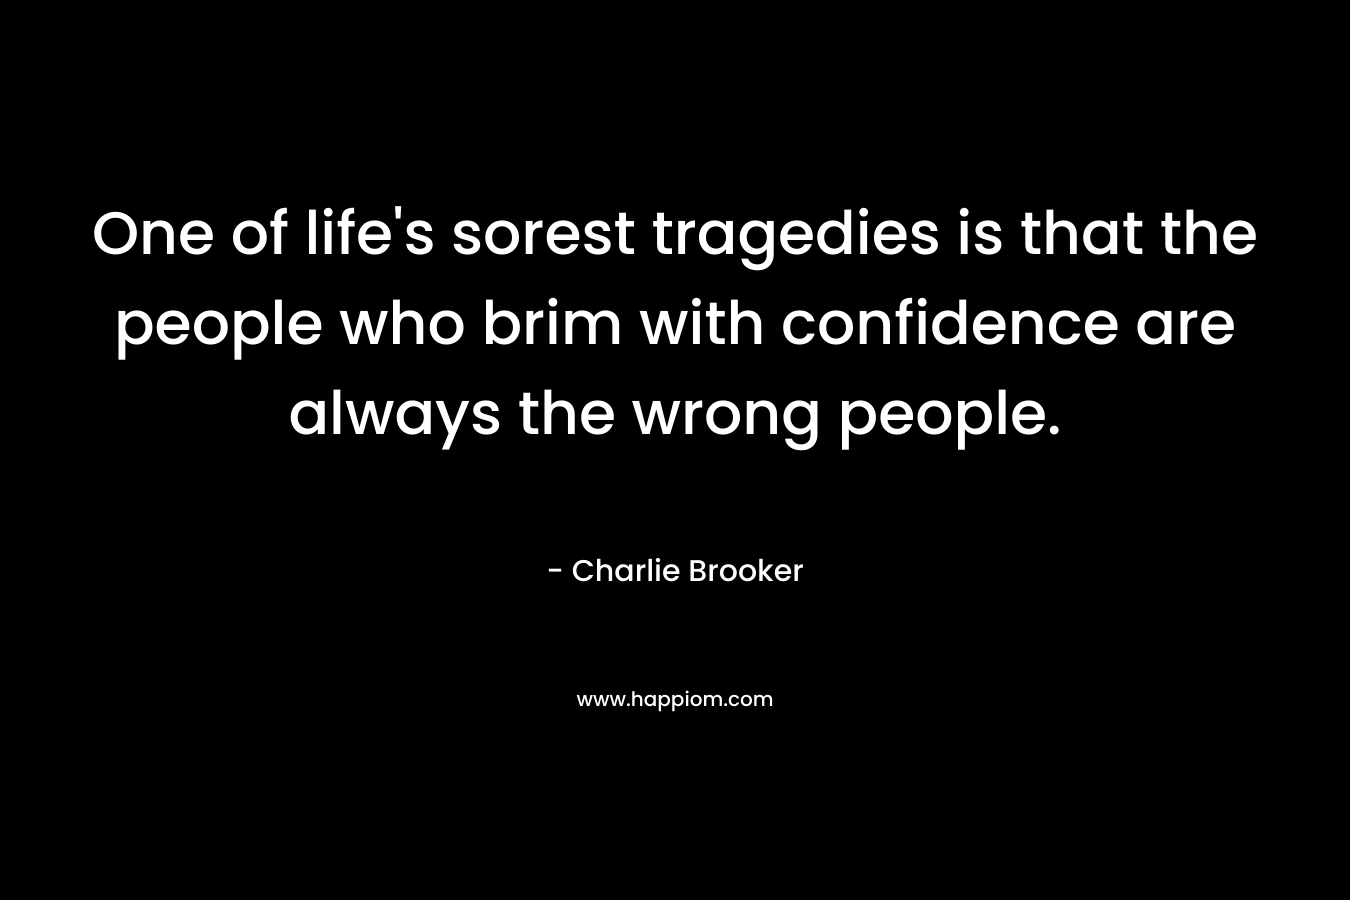 One of life's sorest tragedies is that the people who brim with confidence are always the wrong people.